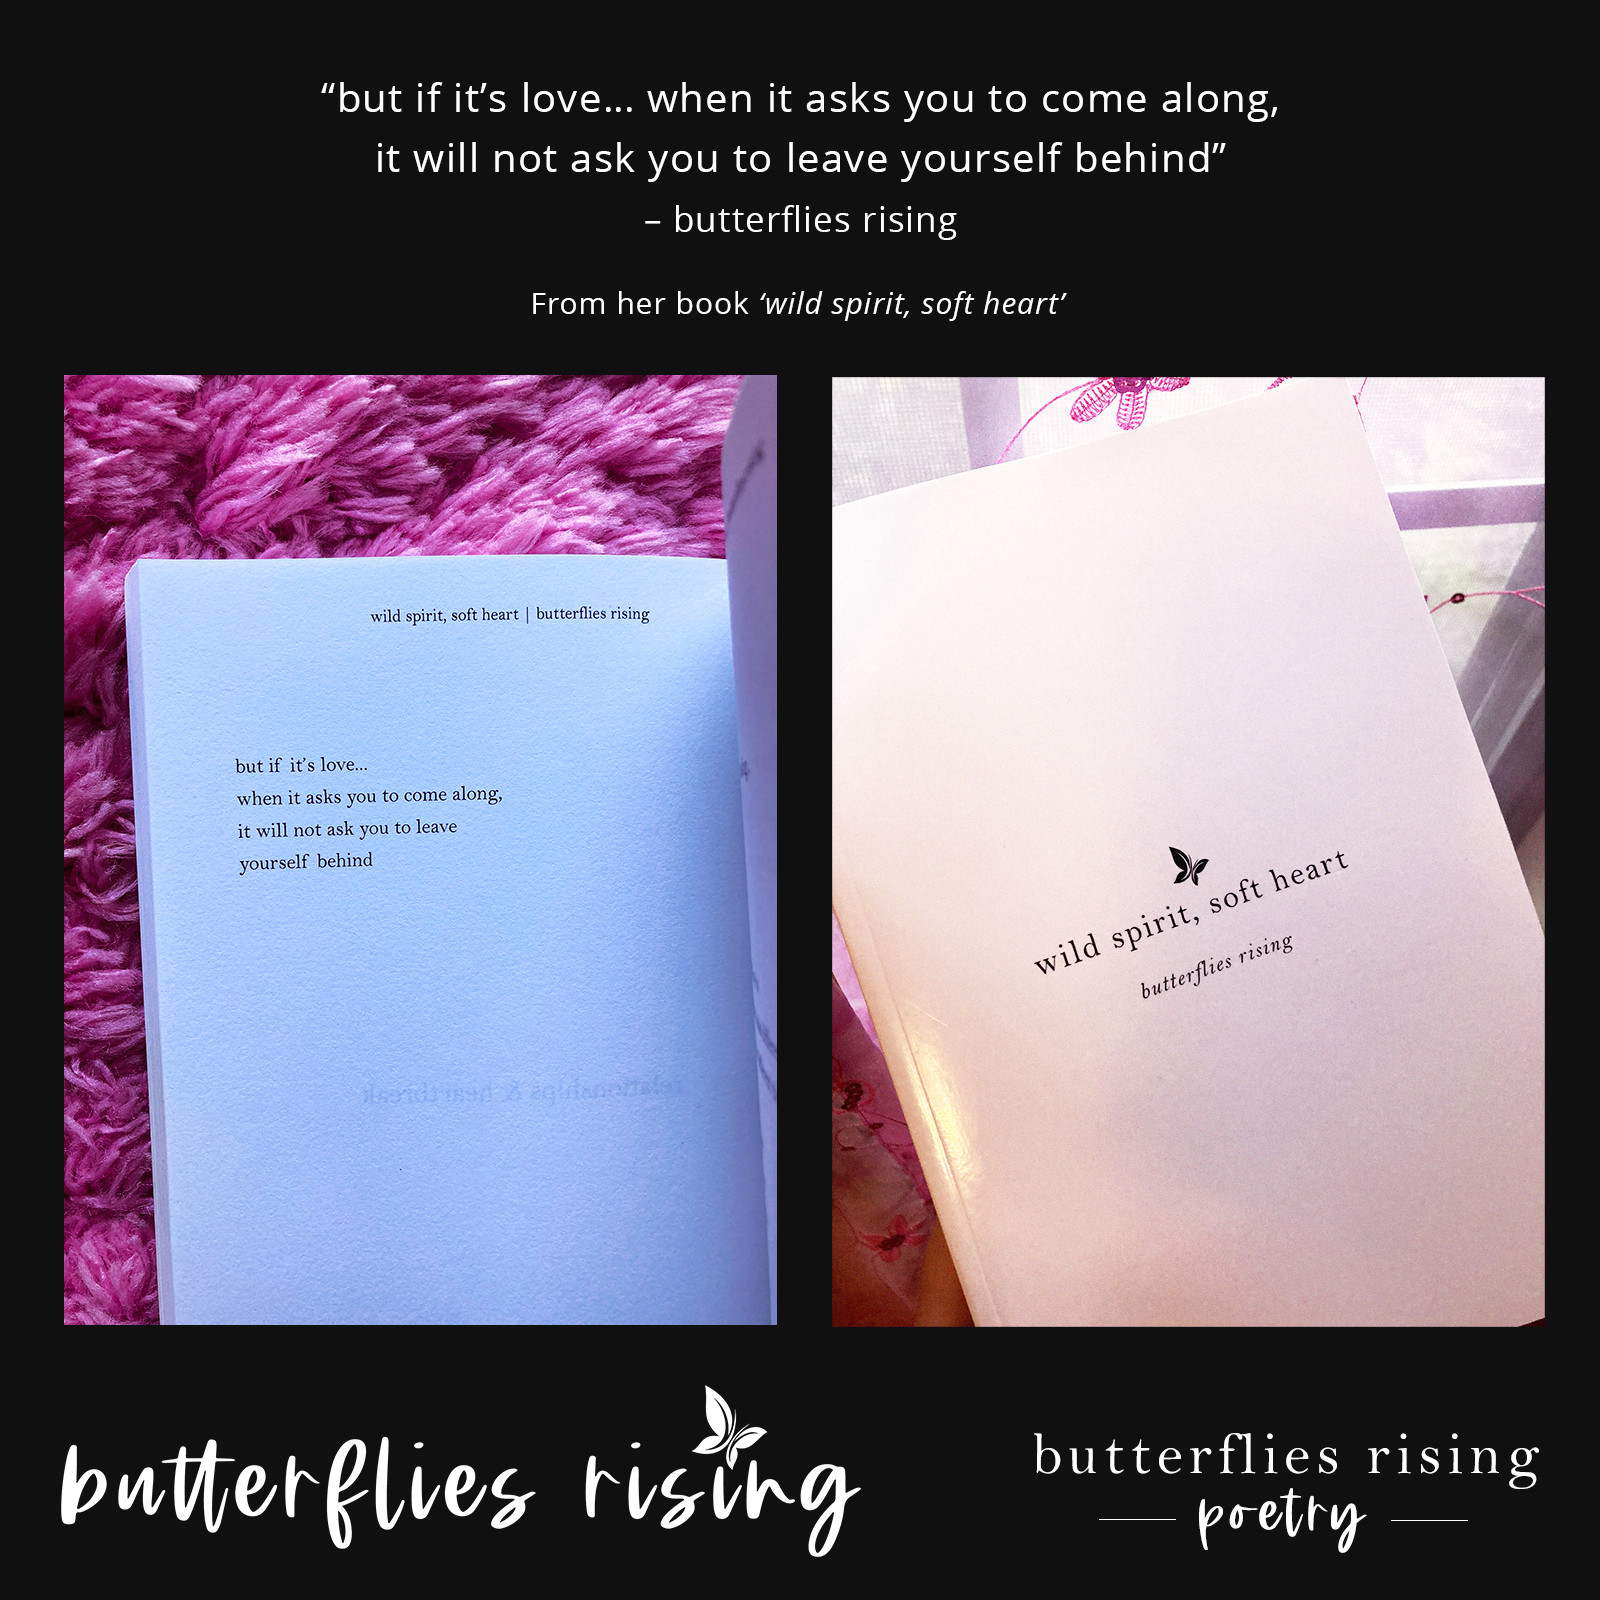 but if it’s love... when it asks you to come along, it will not ask you to leave yourself behind - butterflies rising